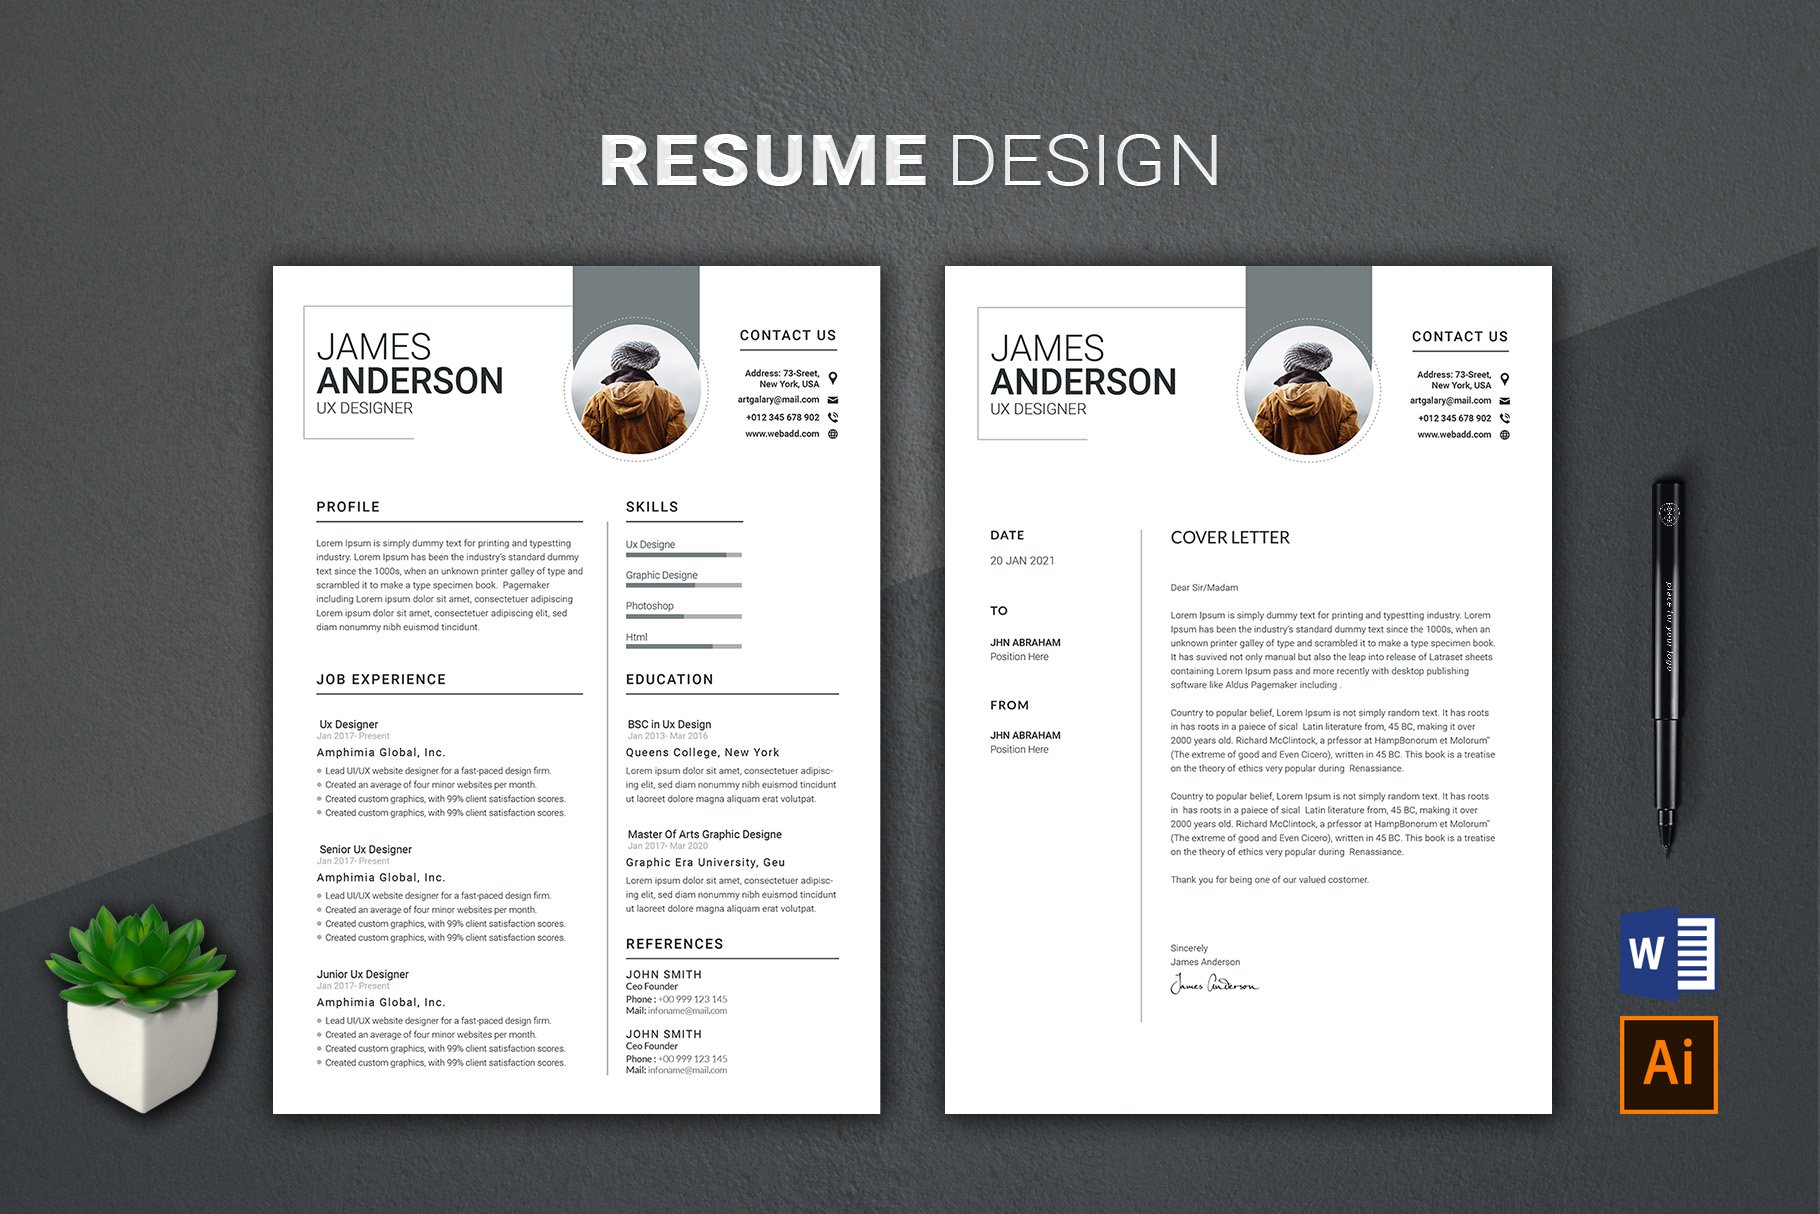 Resume MS Word preview image.